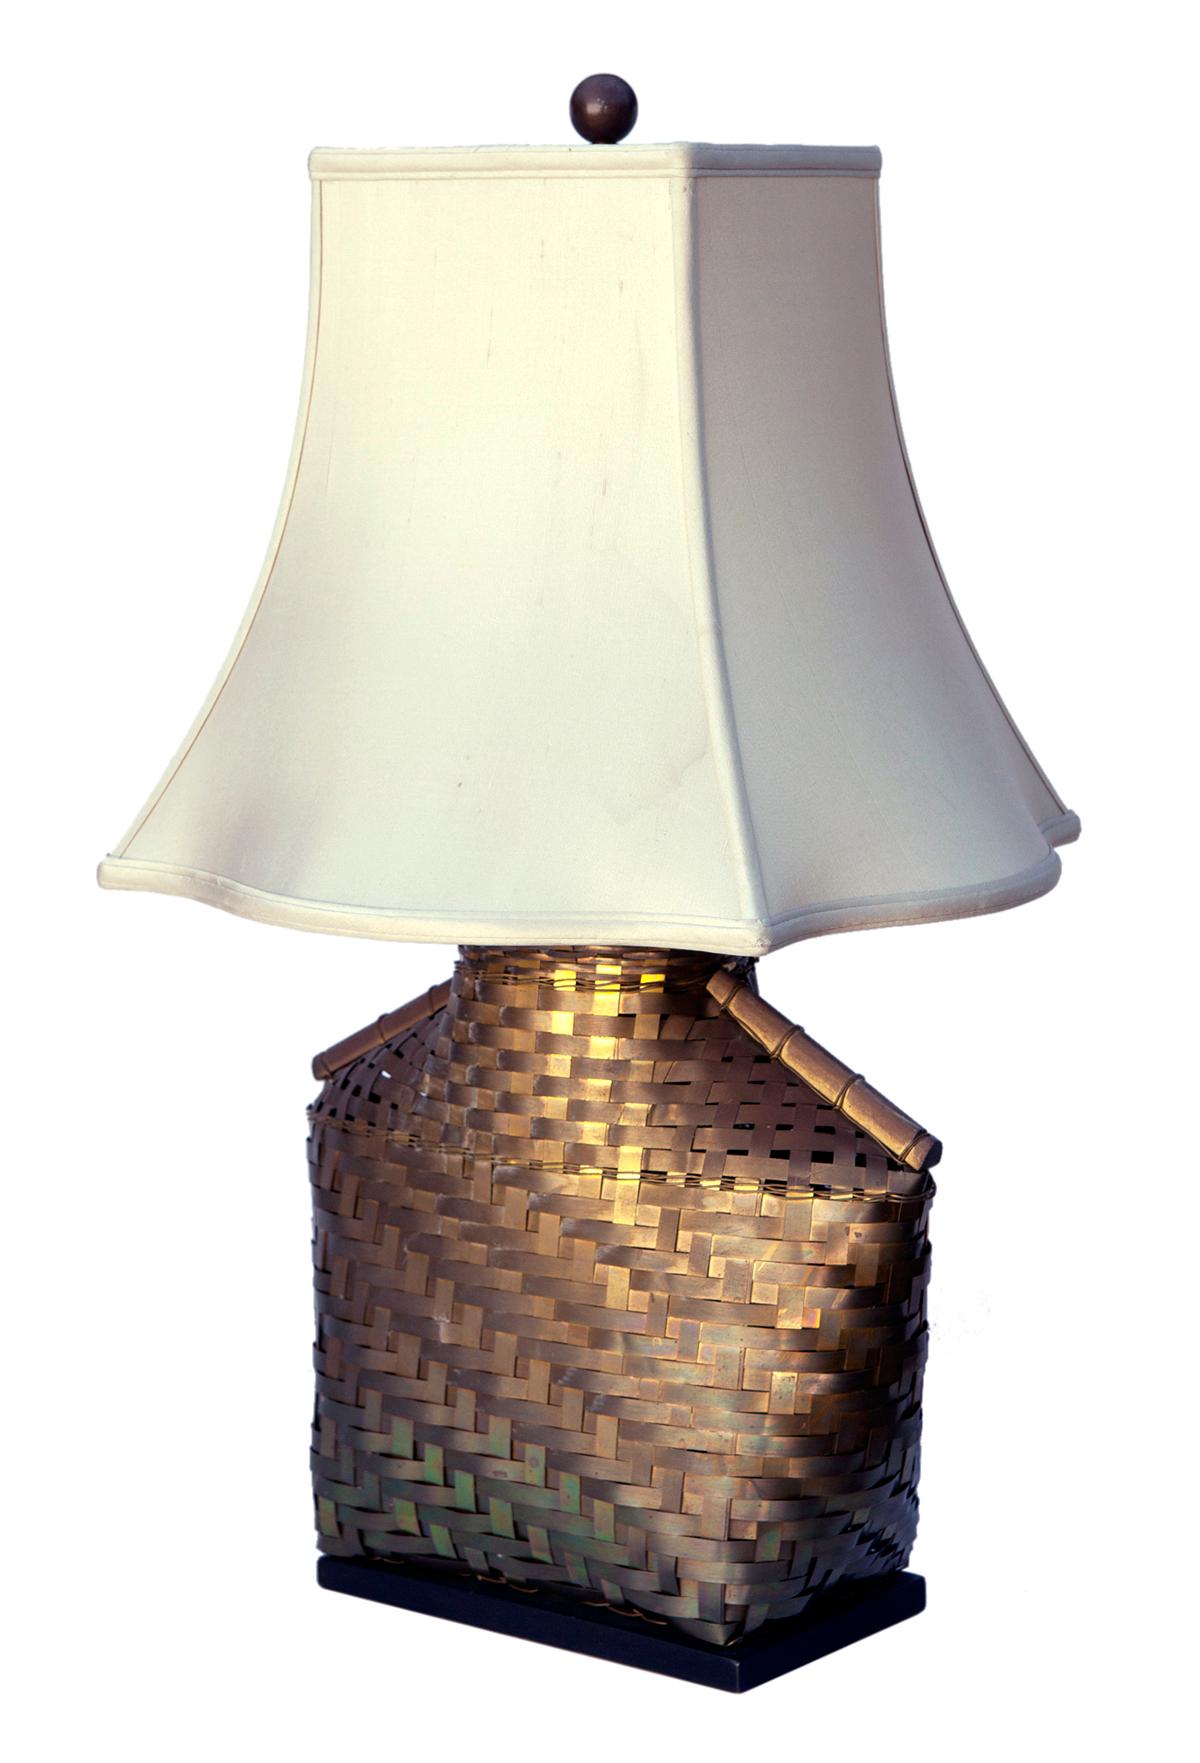 Asian inspired, mid century Chapman table lamp in handwoven brass, which sits on an ebony base.
Paired with an aftermarket shade, which is not in perfect condition, see pictures for details